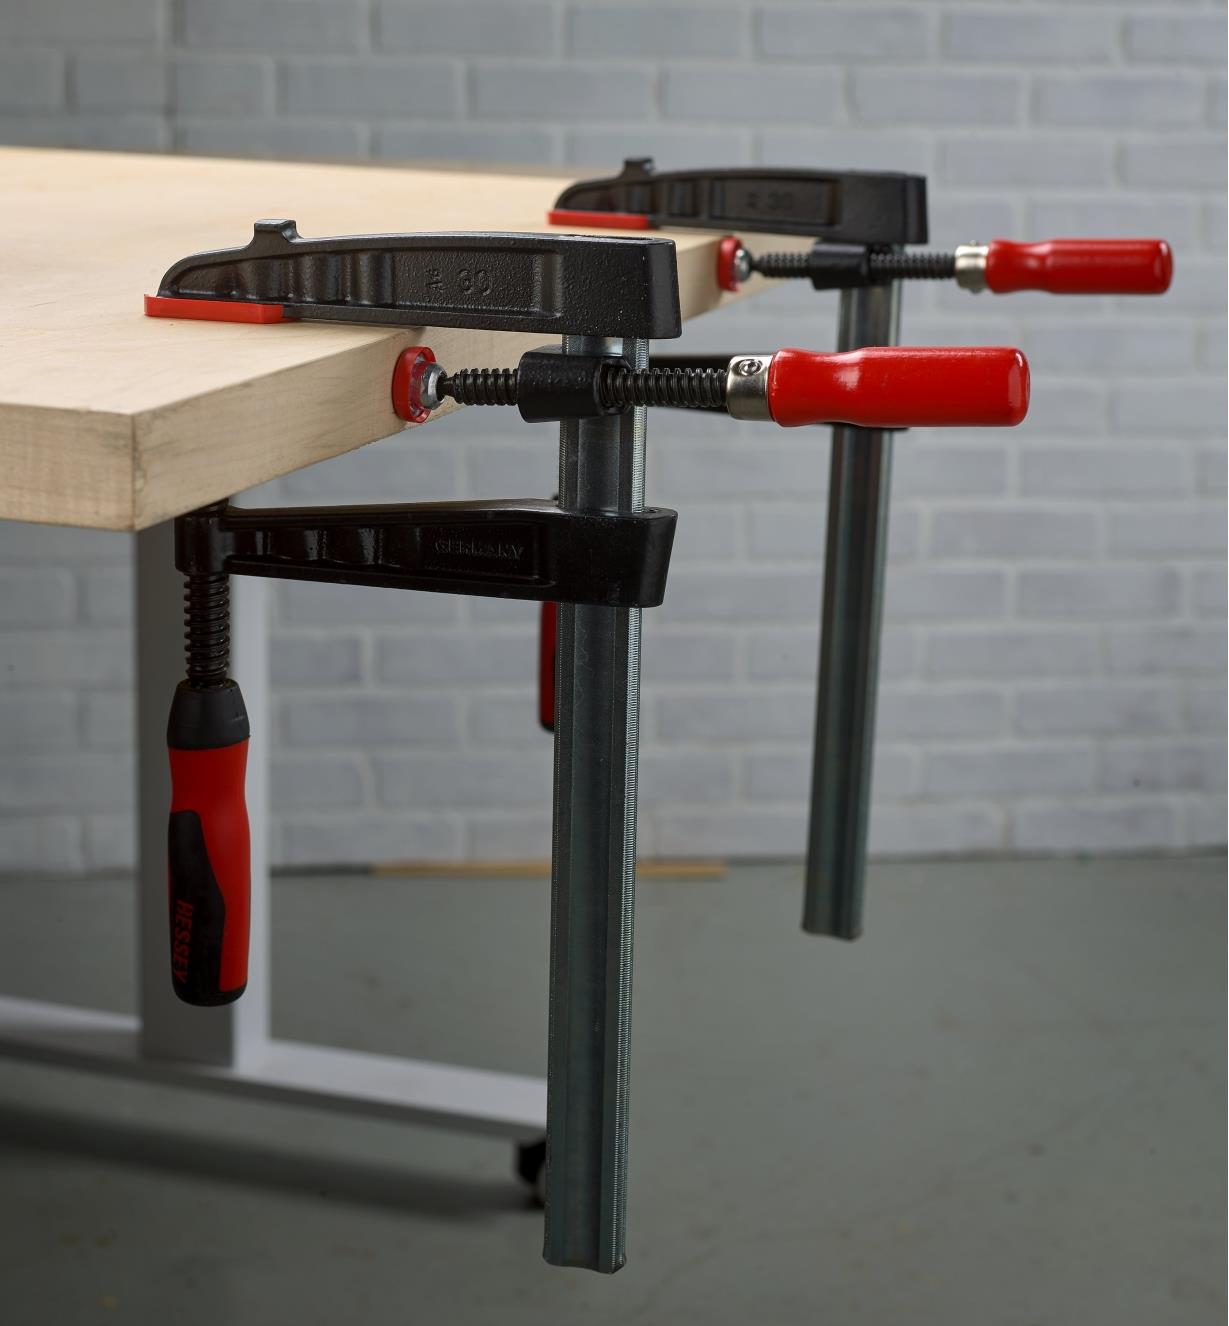 Two Bessey single-spindle edge clamps used with a Bessey fast-acting clamp used to clamp a strip of wood to the edge of a panel